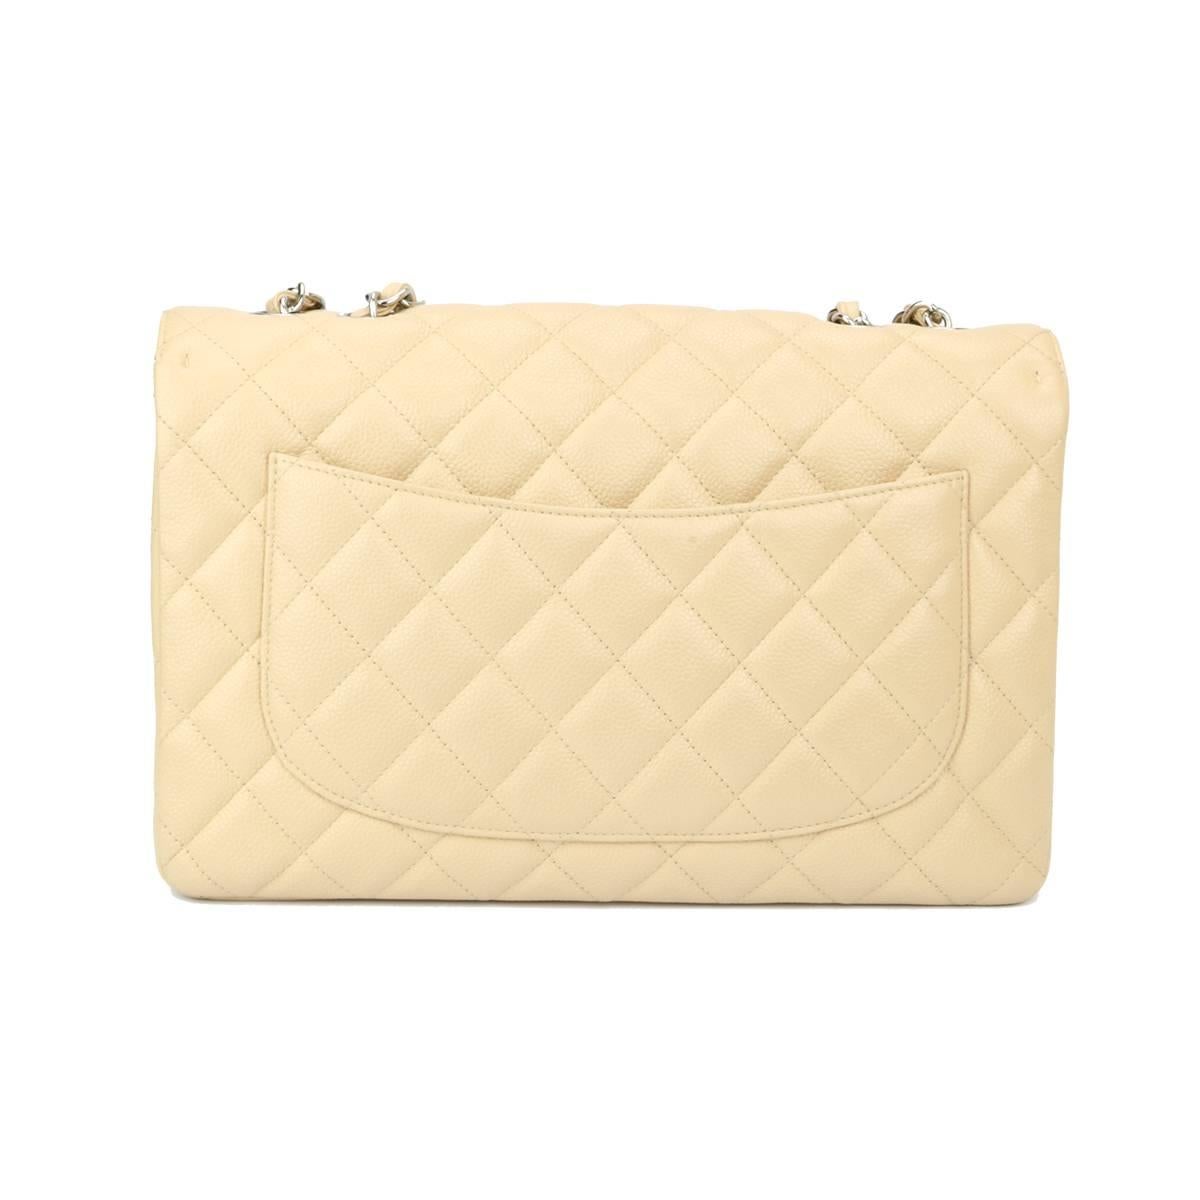 Authentic CHANEL Classic Single Flap Jumbo Beige Clair Caviar with Silver Hardware 2009.

This stunning bag is in a mint condition. The bag still holds the original shape and the hardware is still very shiny.

Exterior Condition: mint condition,